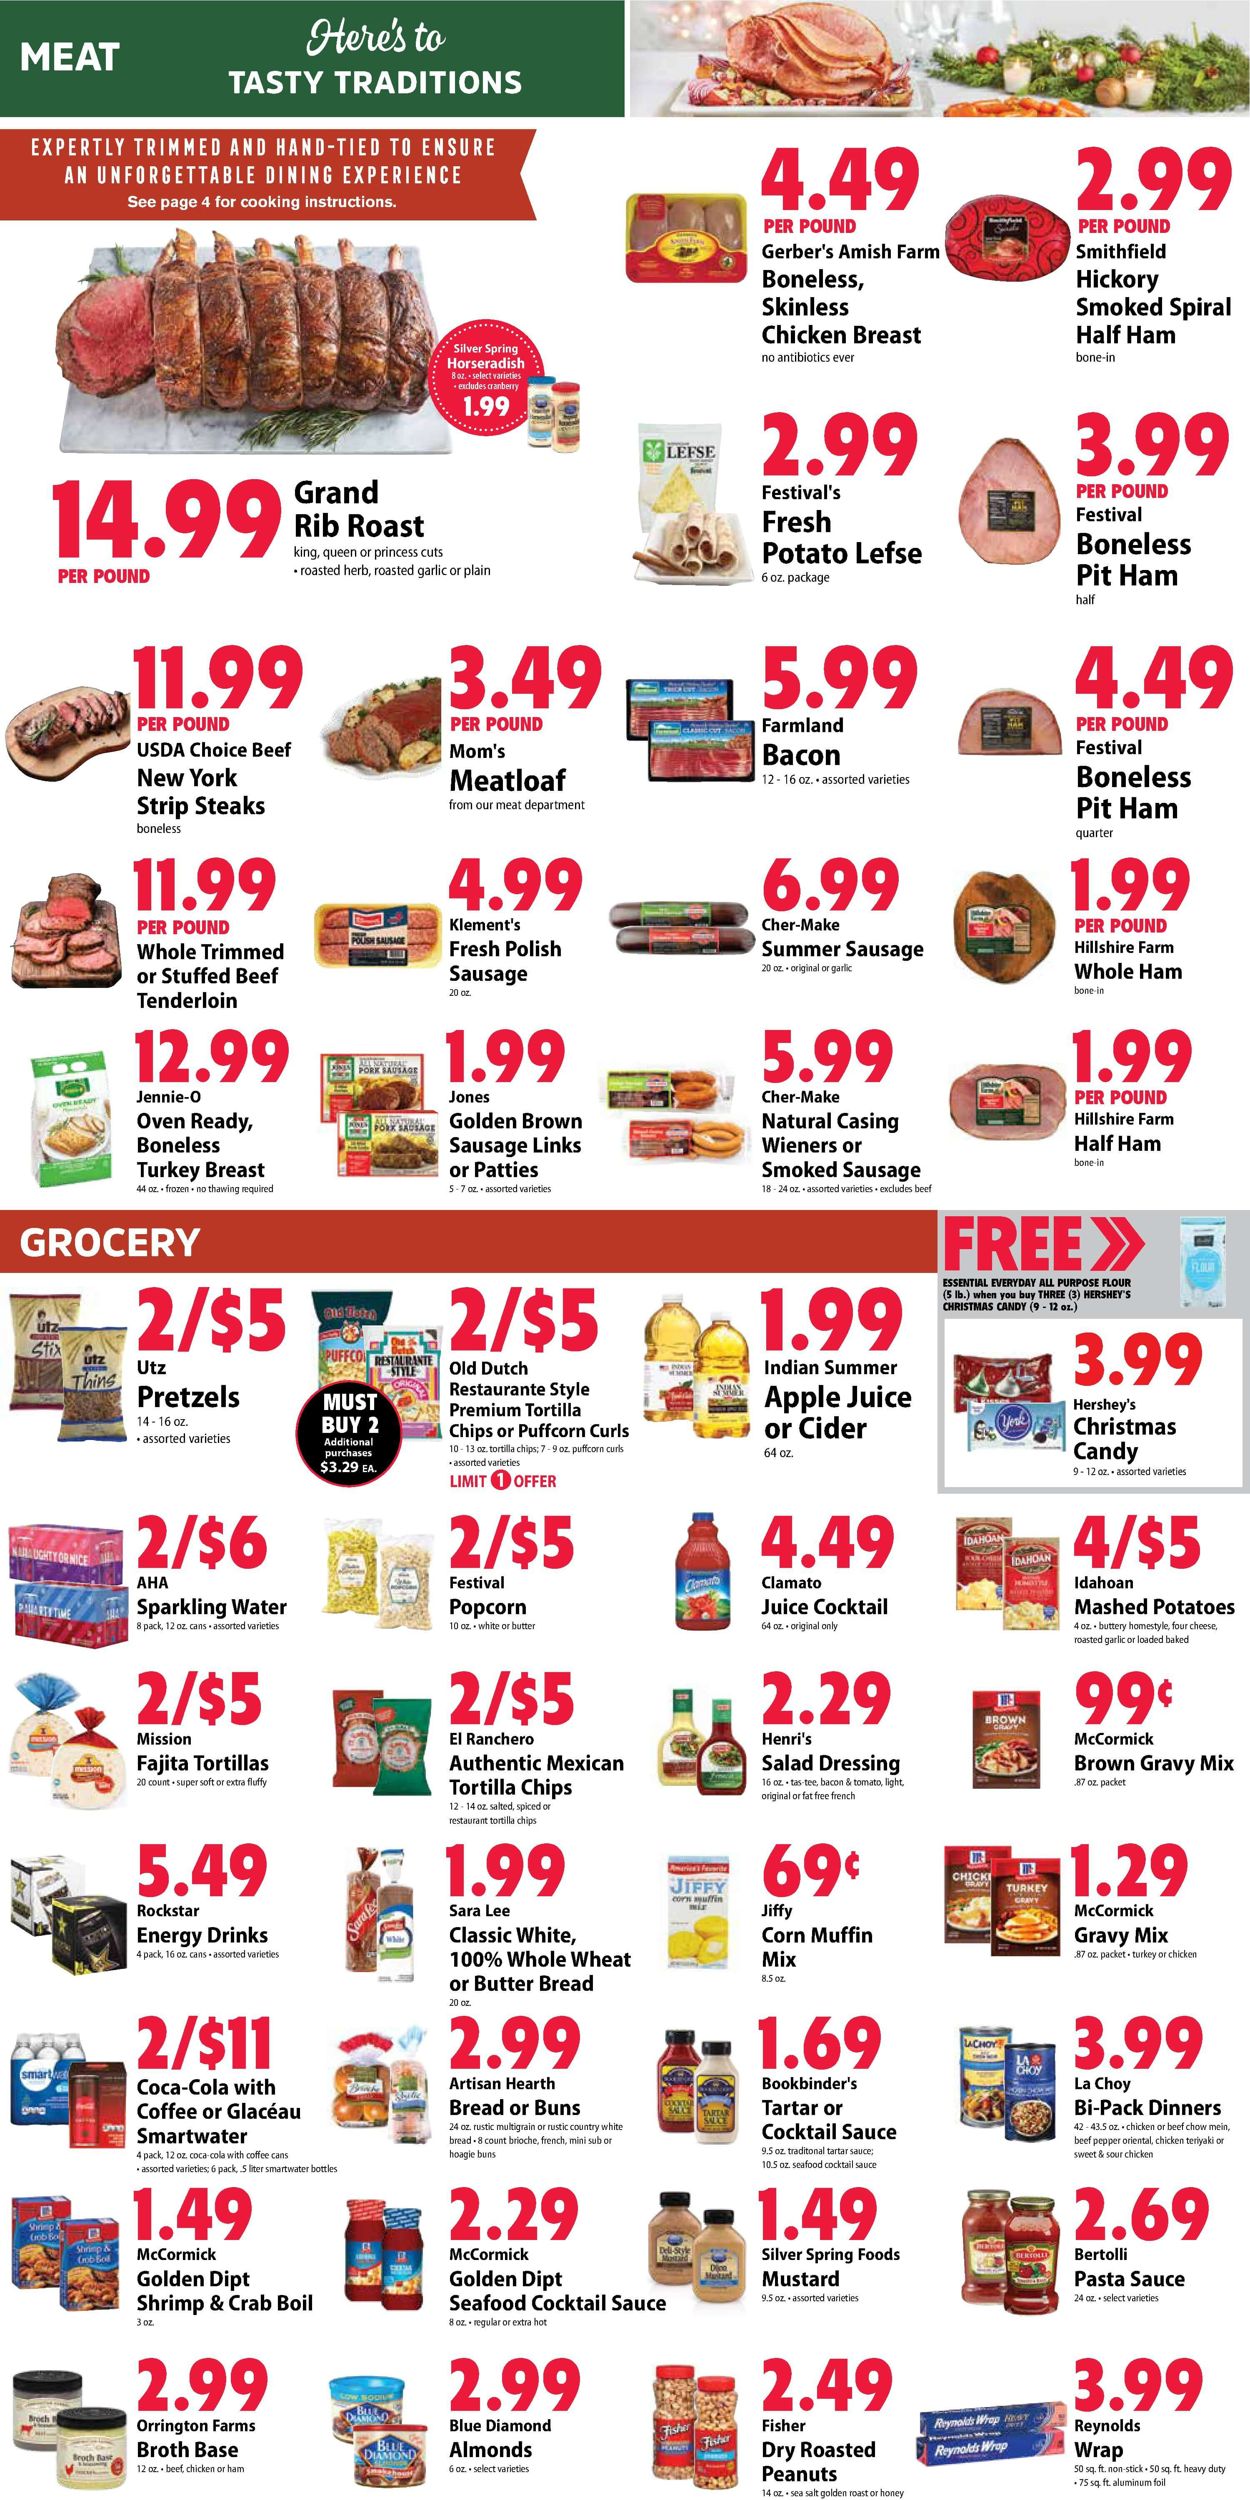 Festival Foods CHRISTMAS 2021 Weekly Ad Circular - valid 12/15-12/21/2021 (Page 2)